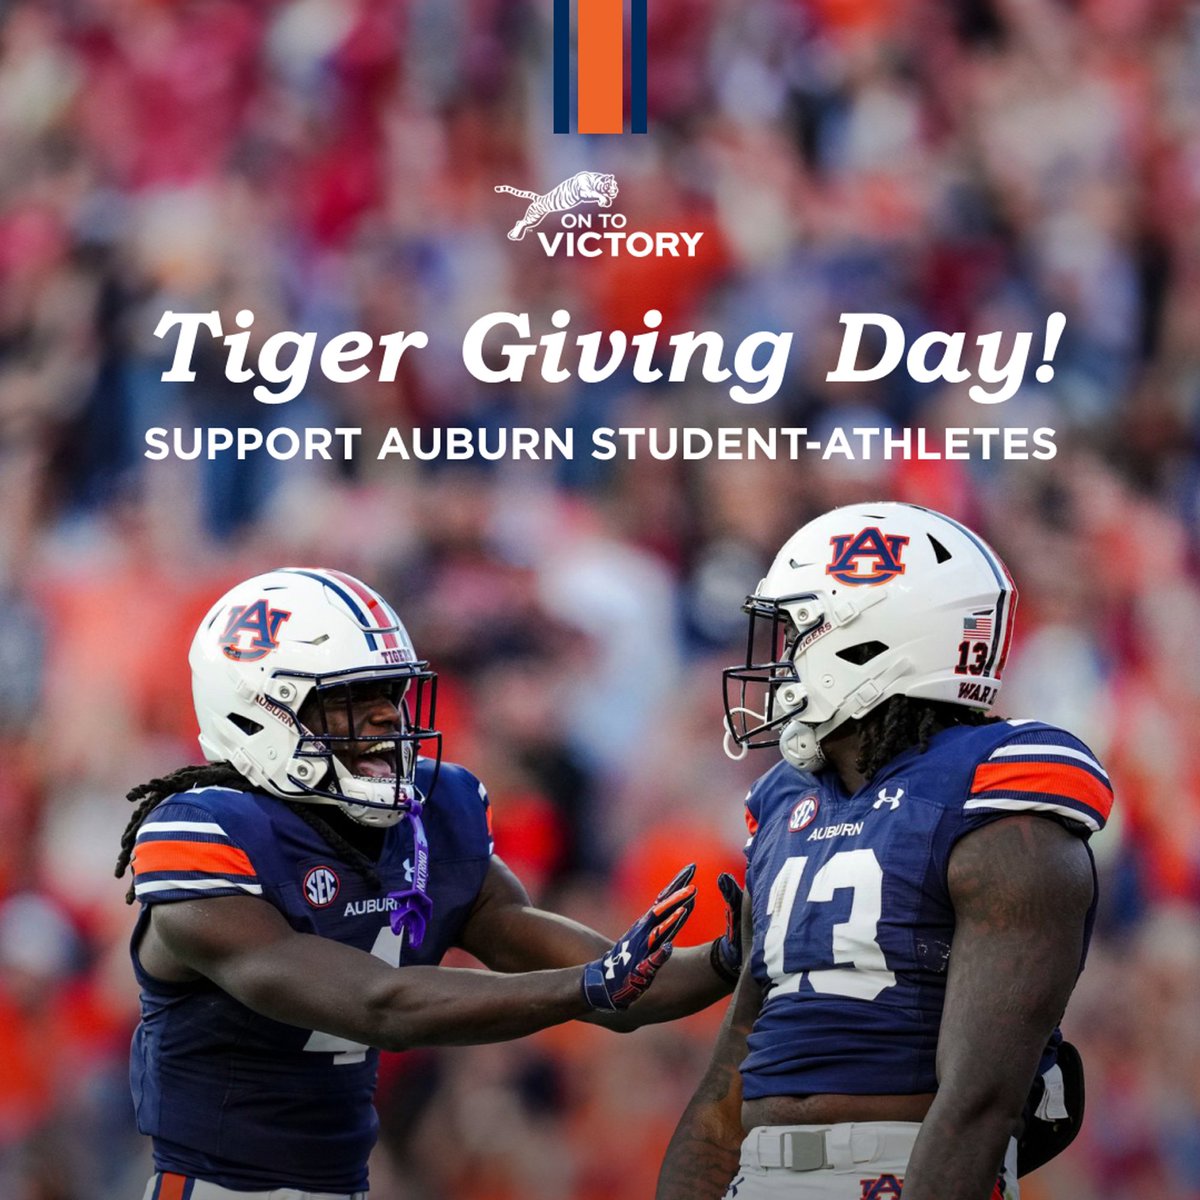 Happy #TigerGivingDay 🐯

It’s more than just a day, it’s your chance to support Auburn student-athletes and help strengthen Auburn Athletics!

Become a member of On To Victory to show your @auburntigers some love for Tiger Giving Day. 

bit.ly/43MC9Ju | #WarEagle